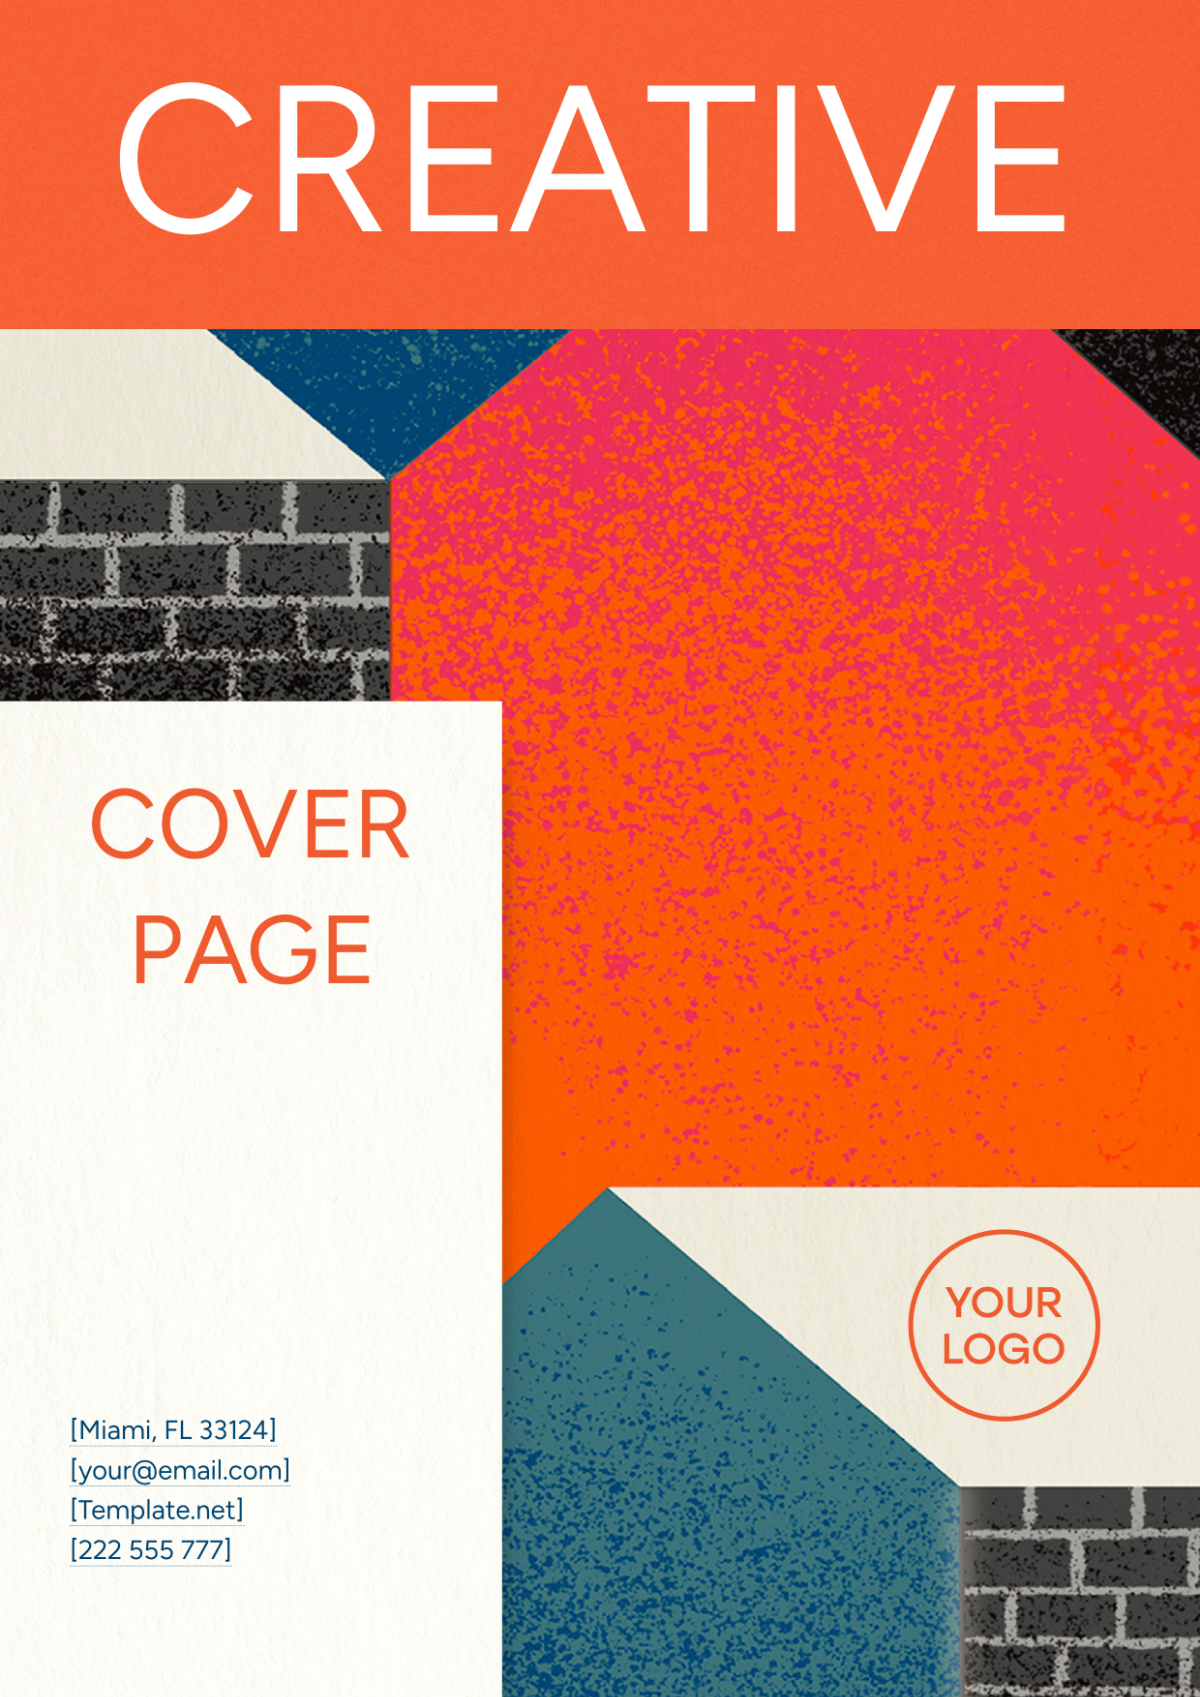 Free Creative Cover Page Image Template